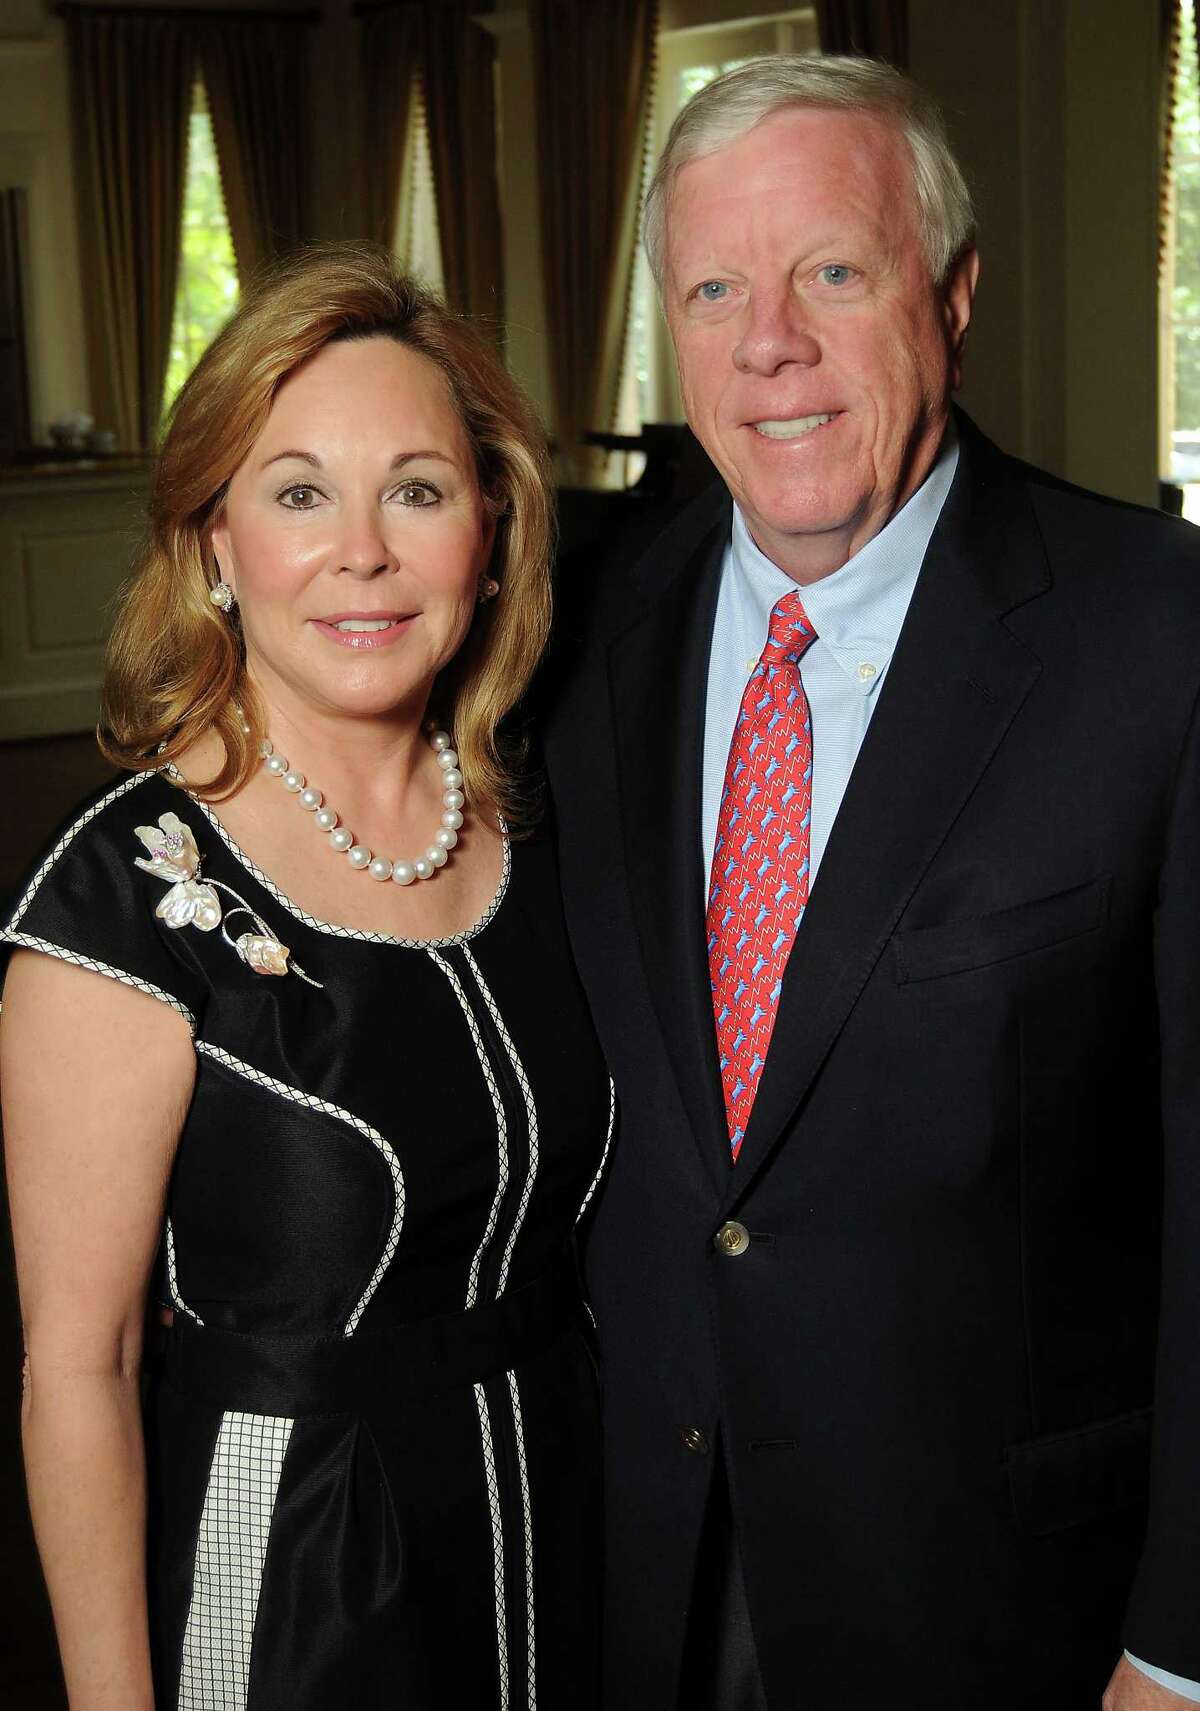 Nancy and Rich Kinder have donated more than $100 million geared toward green space transformation and education in Houston this year.